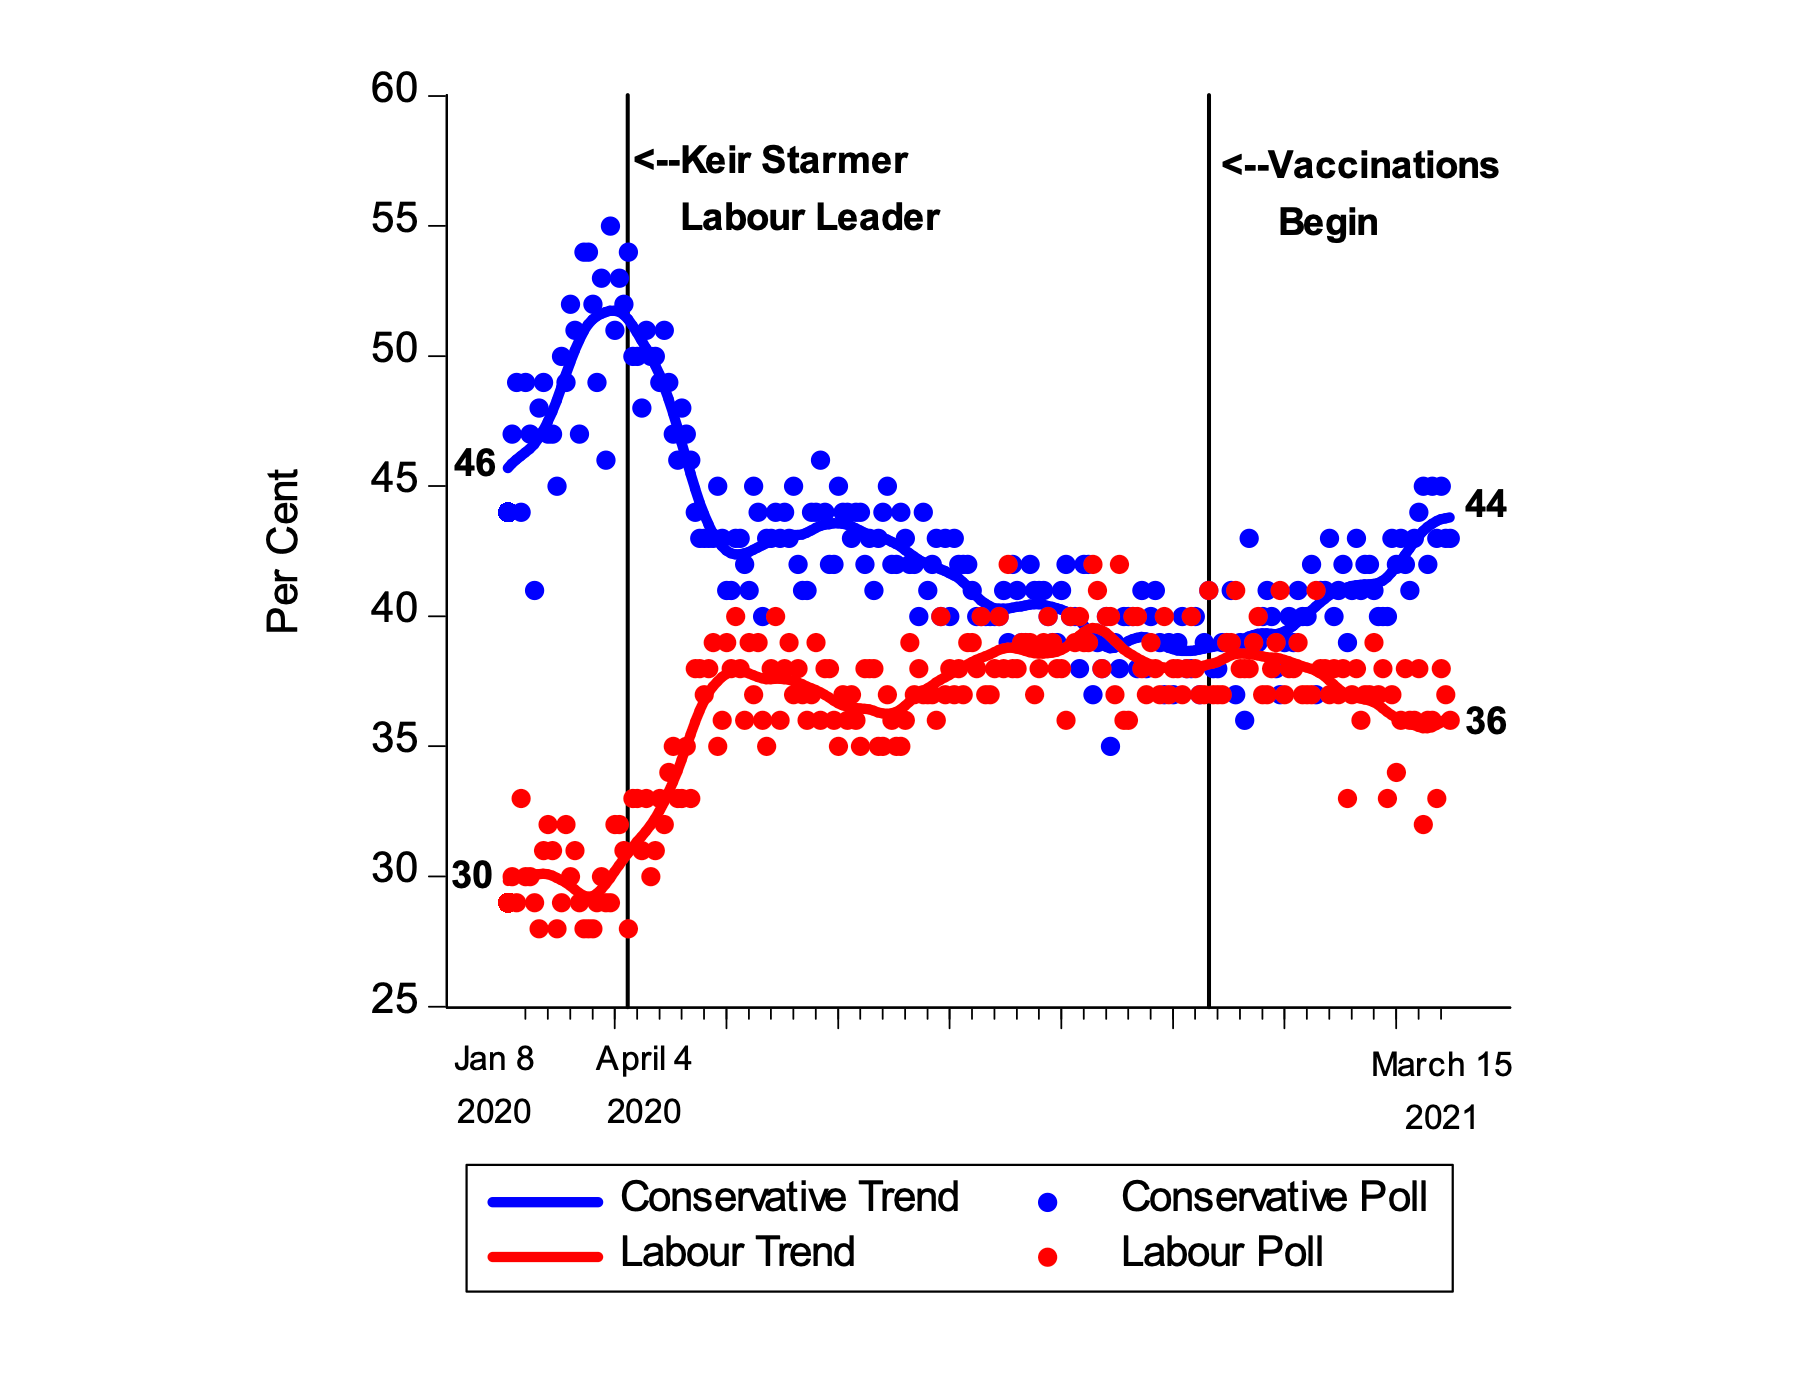 A chart showing how voting intention has shifted throughout the pandemic, with Conservative support declining and then rising again as vaccinations started.